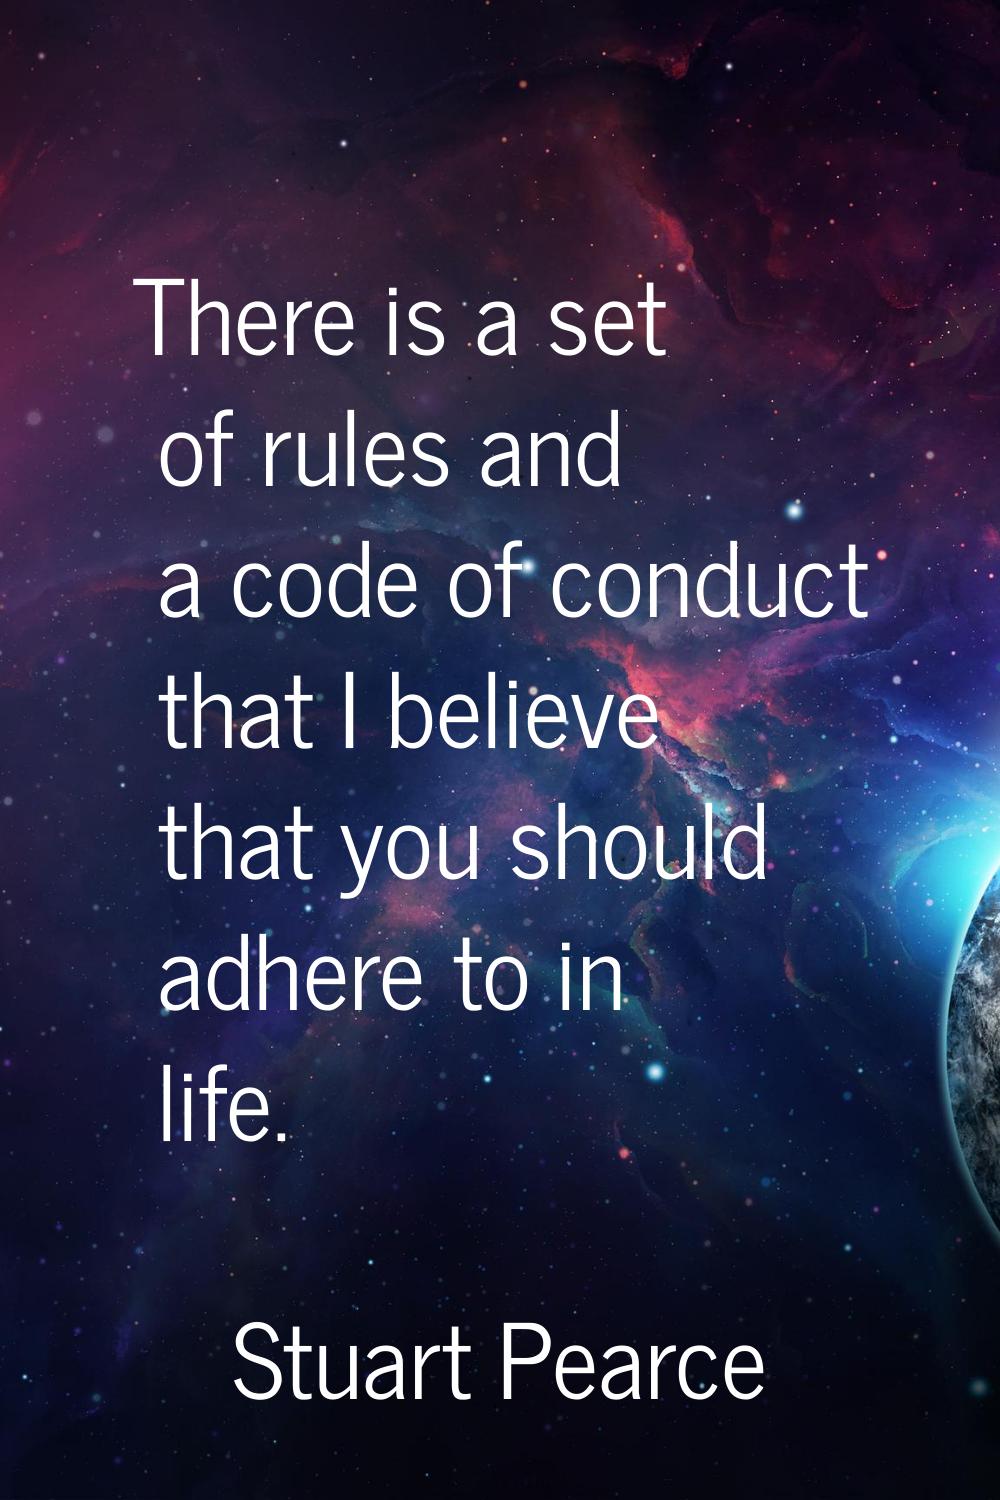 There is a set of rules and a code of conduct that I believe that you should adhere to in life.